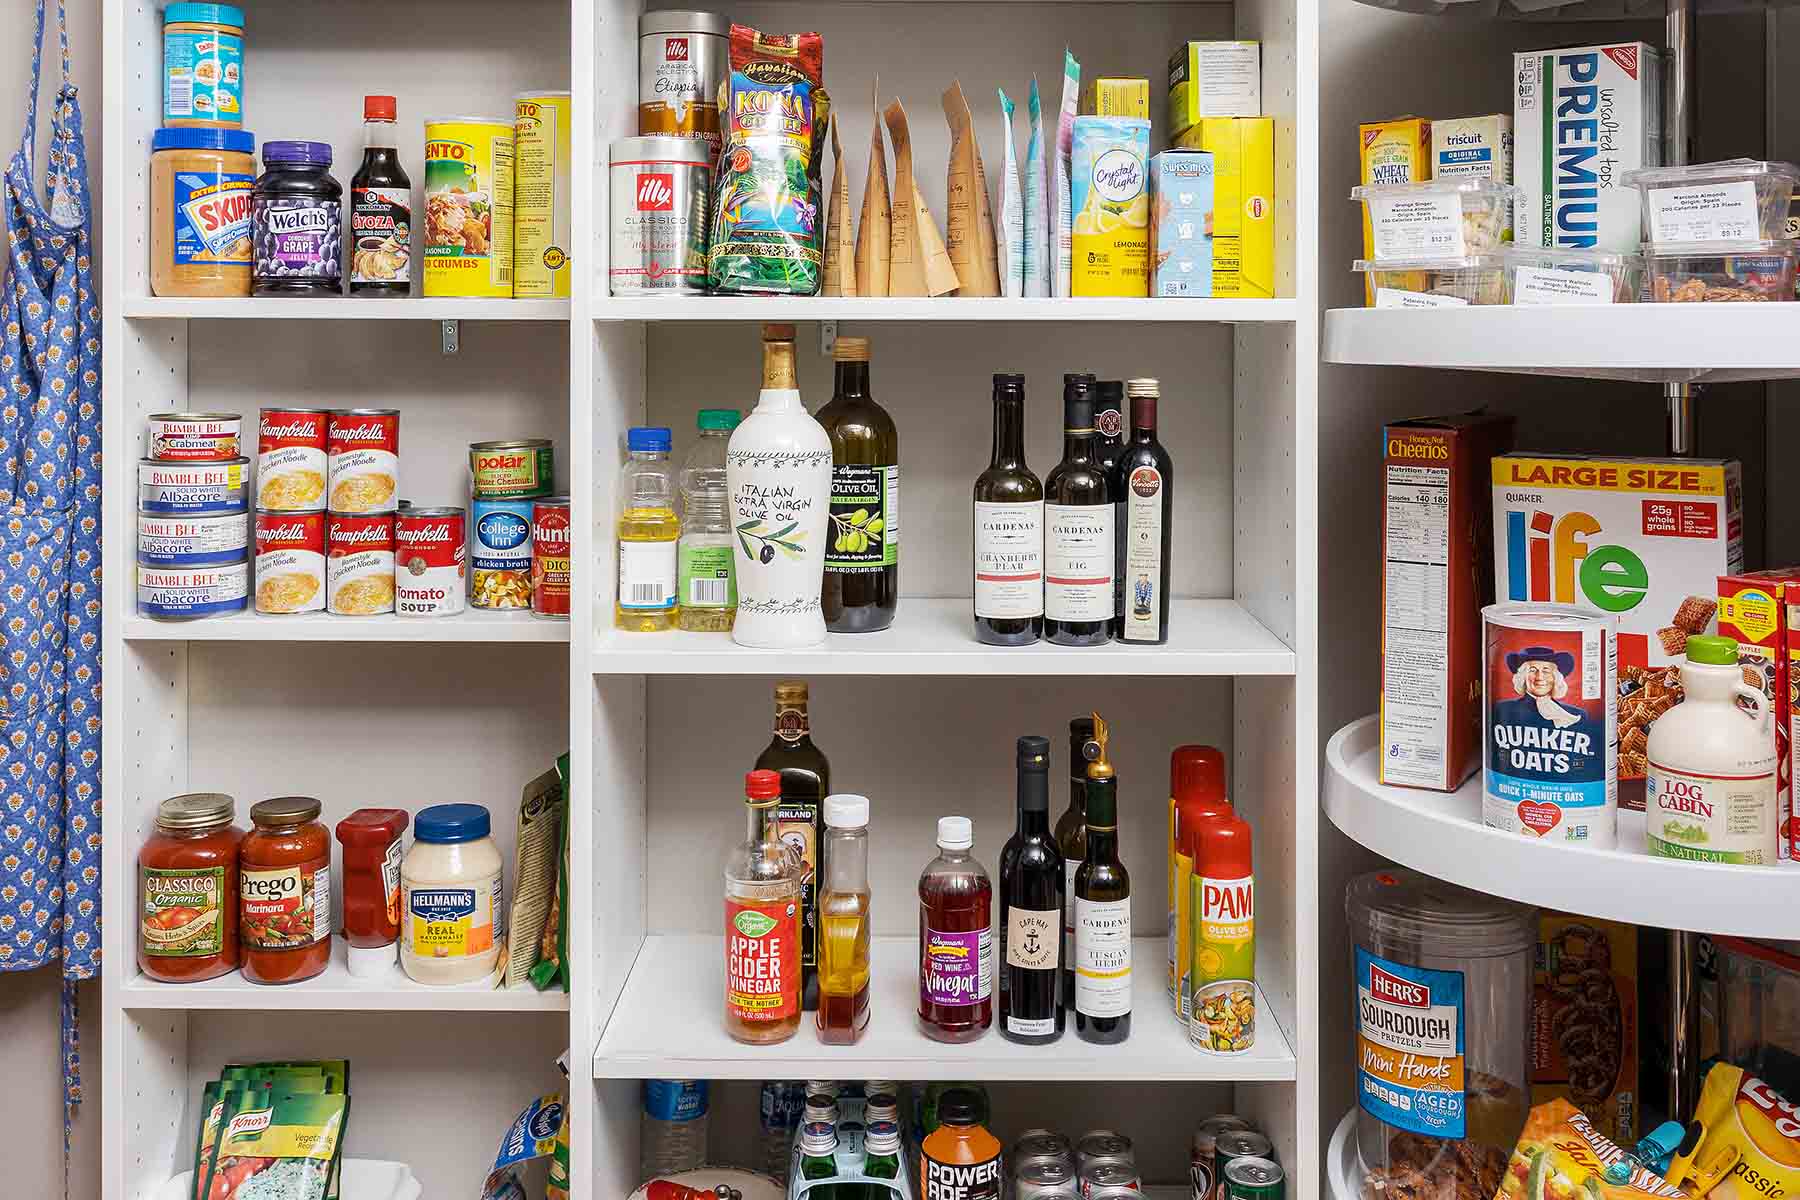 Pantry shelves with items organized